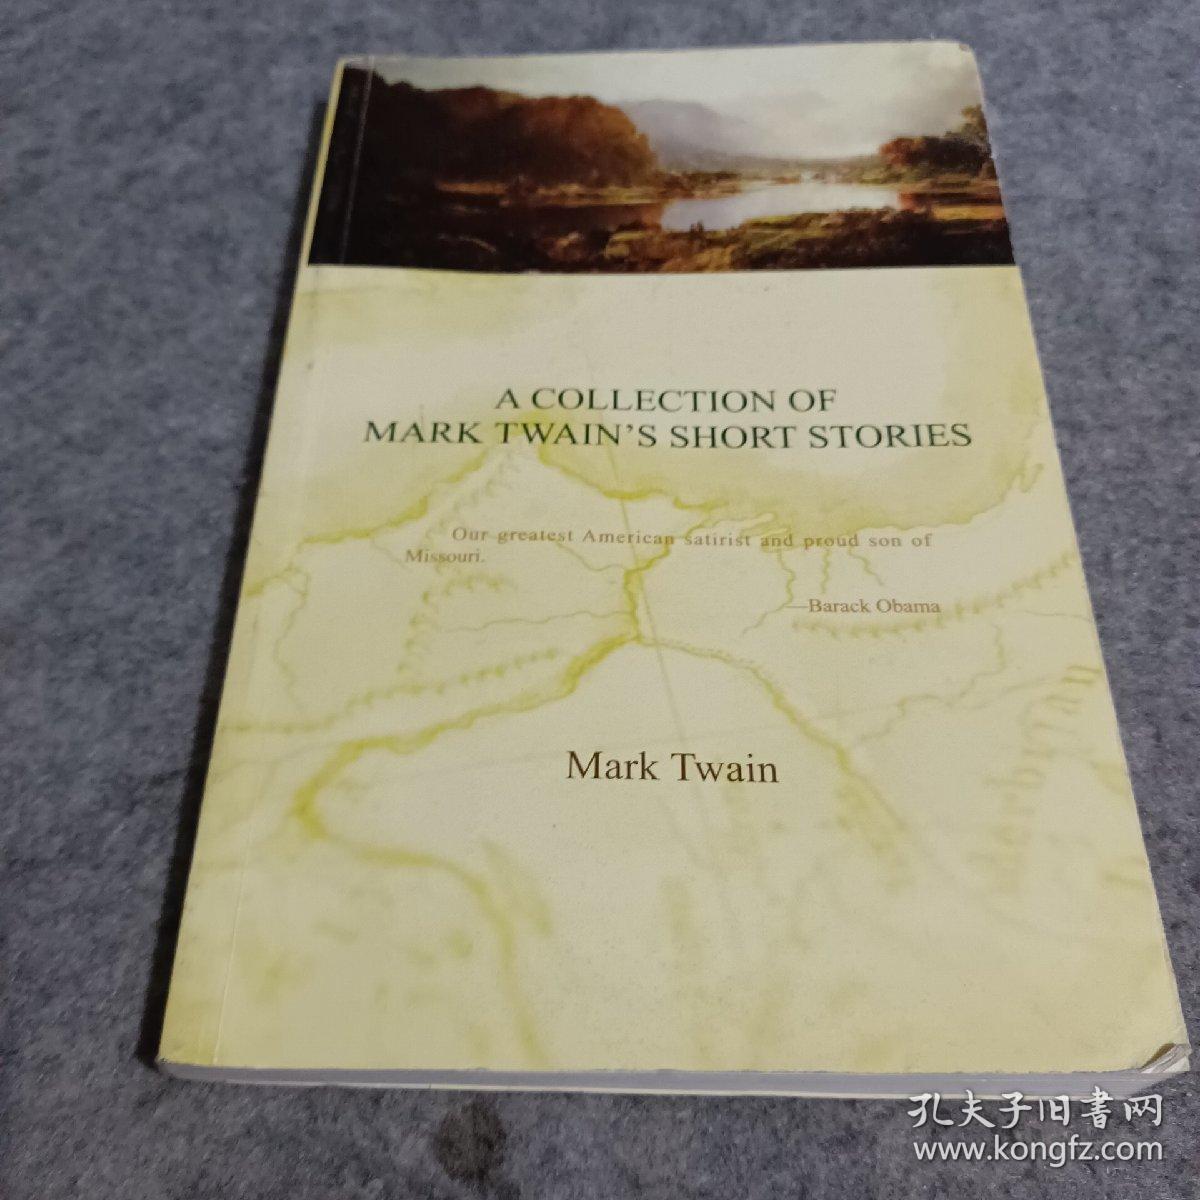 A COLLECTION OF MARK TWAIN'S SHORT STORIES